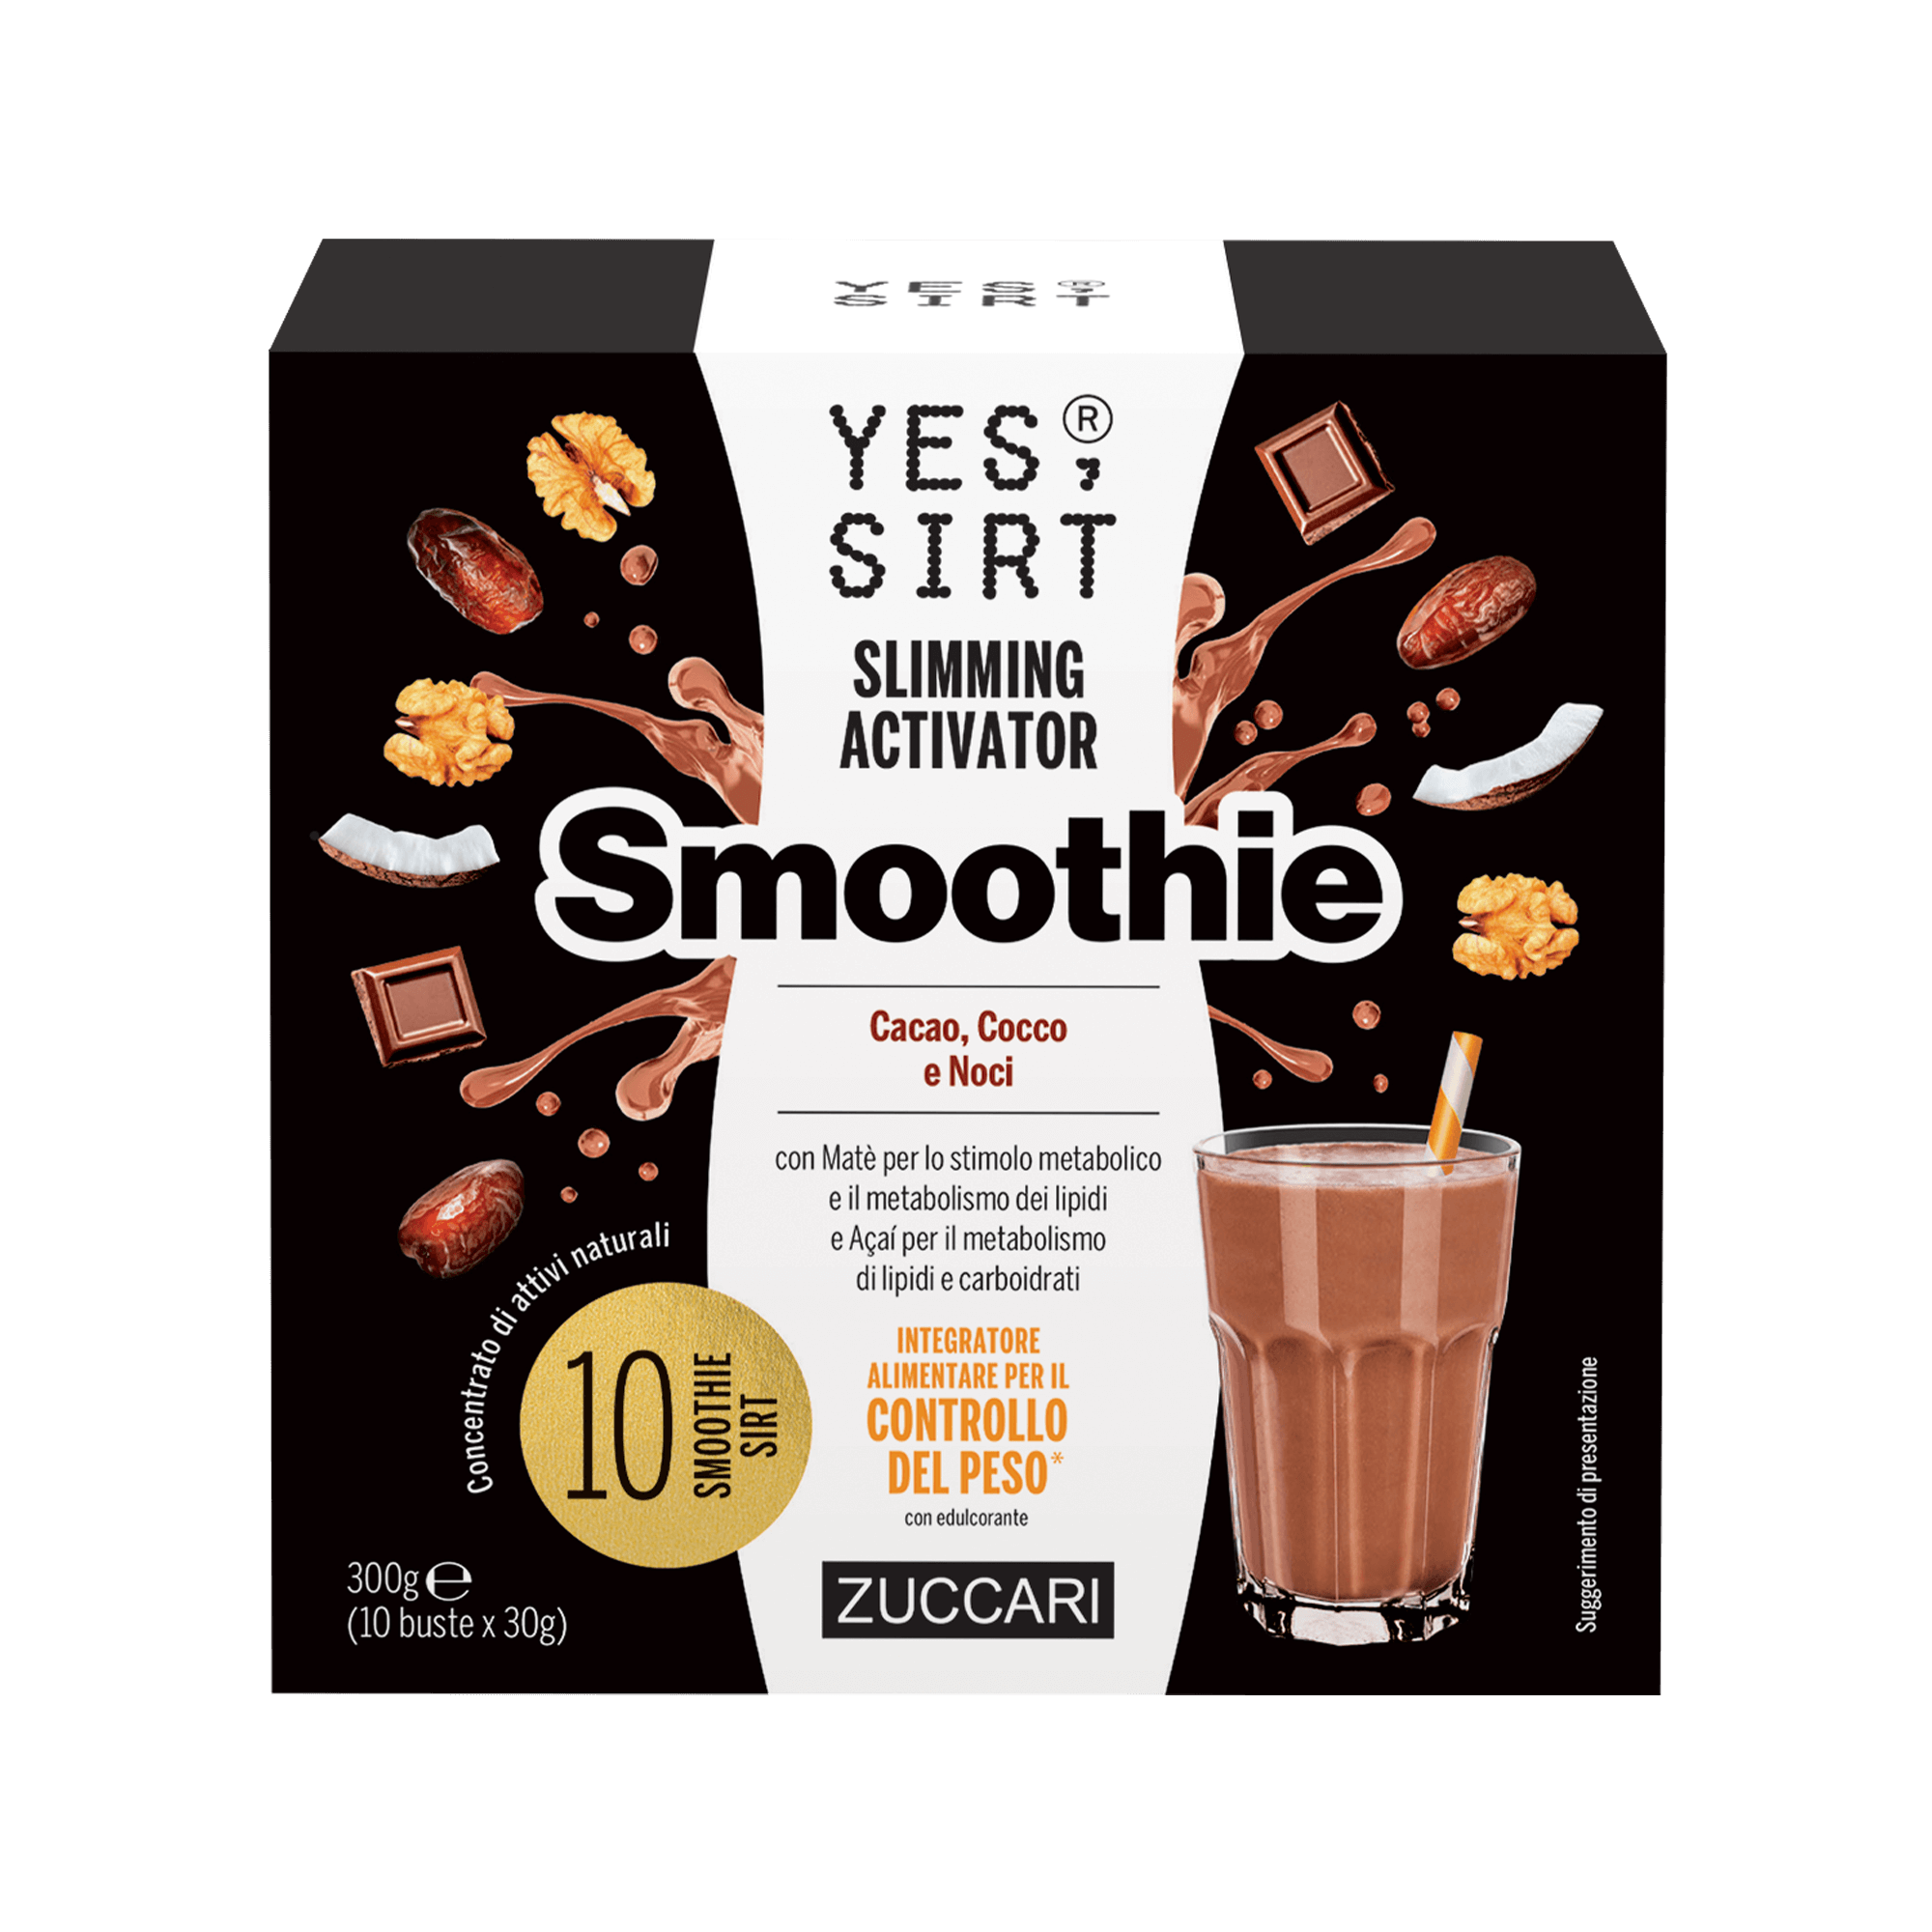 COMING SOON – Yes Sirt Slimming Activator Smoothie Cacao, Cocco e Noci